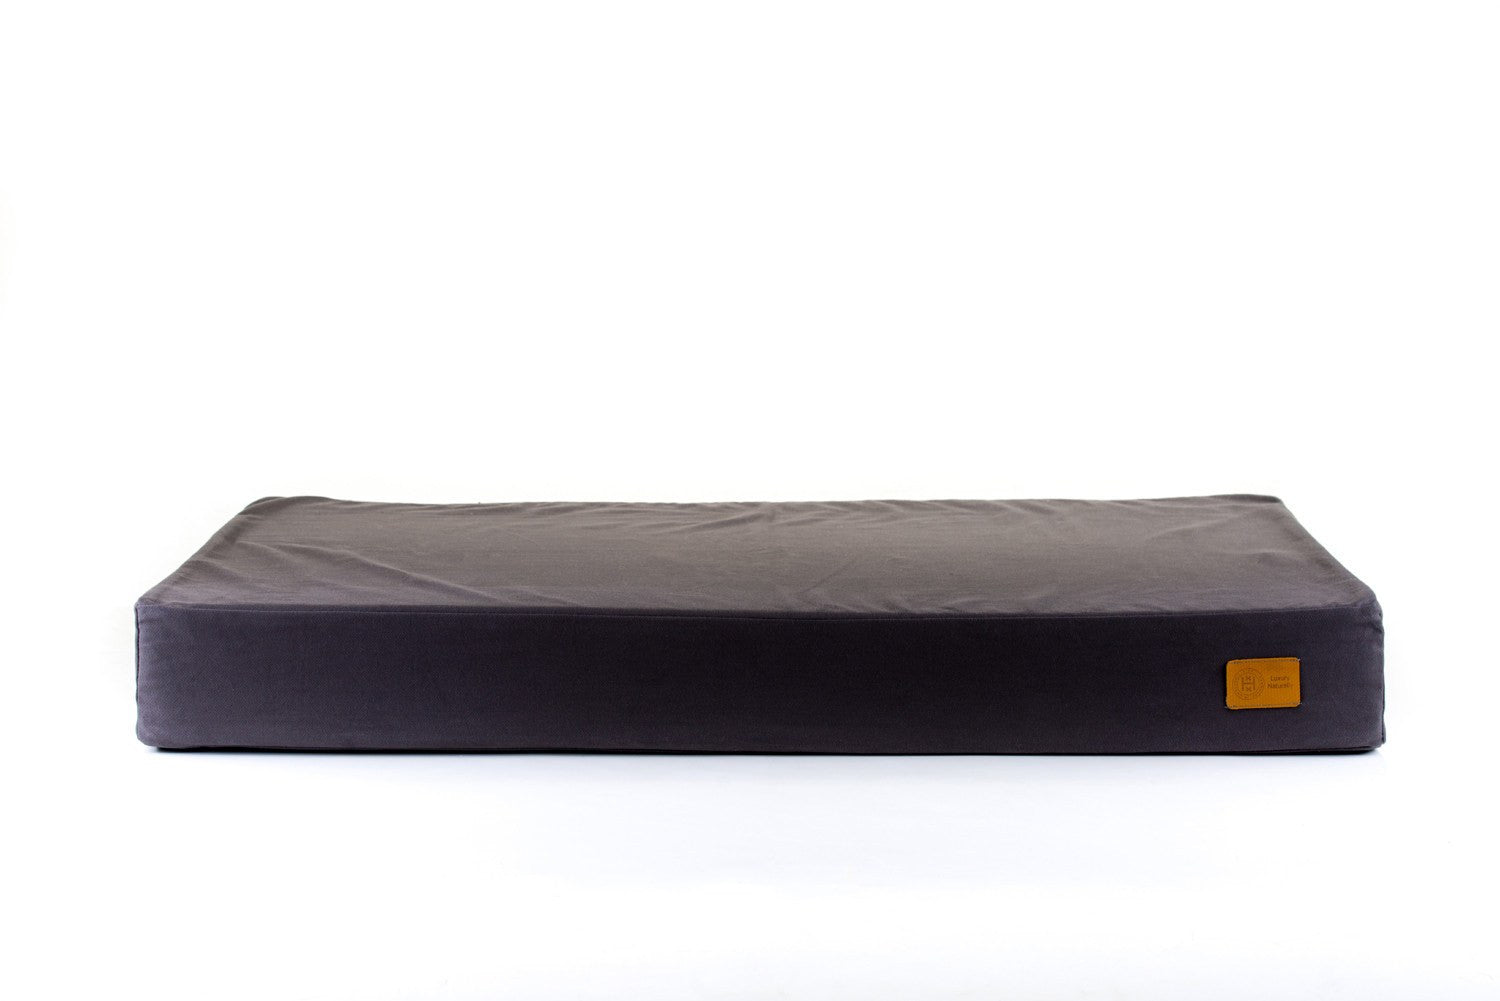 Float orthopaedic heated waterbeds for dogs made in Britain from organic fabric and materials. 